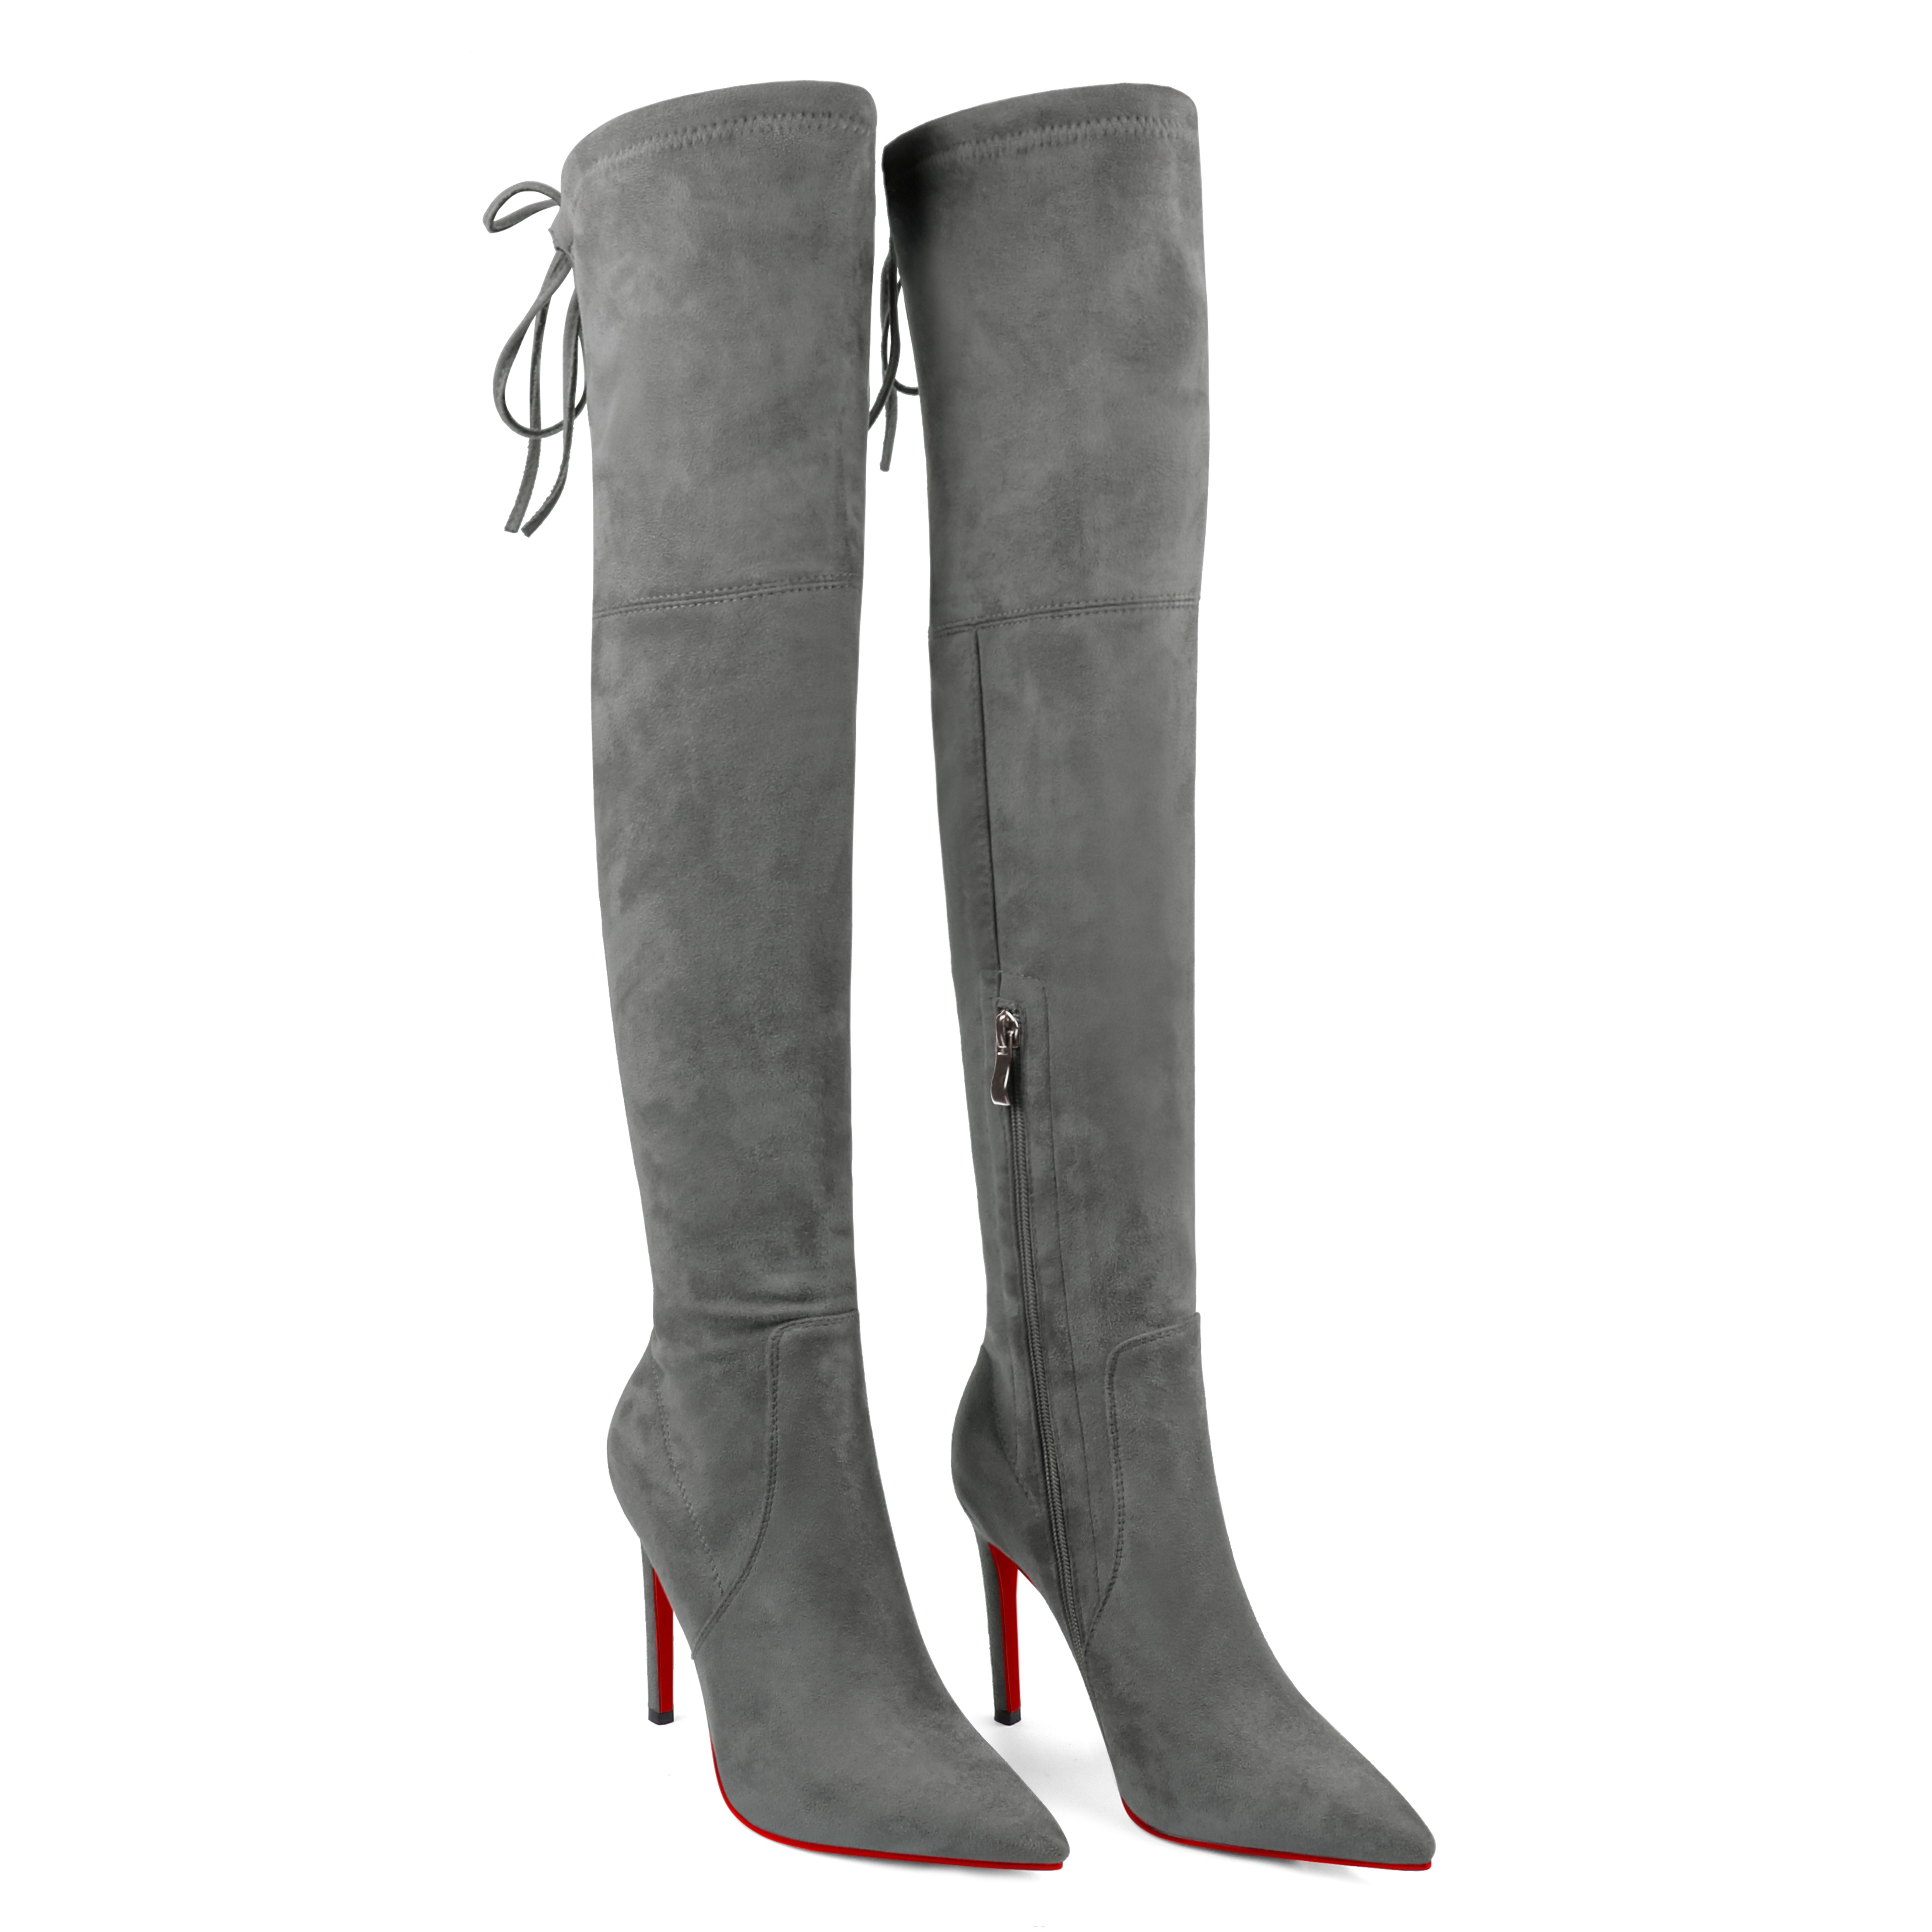 100mm/120mm Women's High Heels Red Bottoms Microsuede Over The Knee Boots